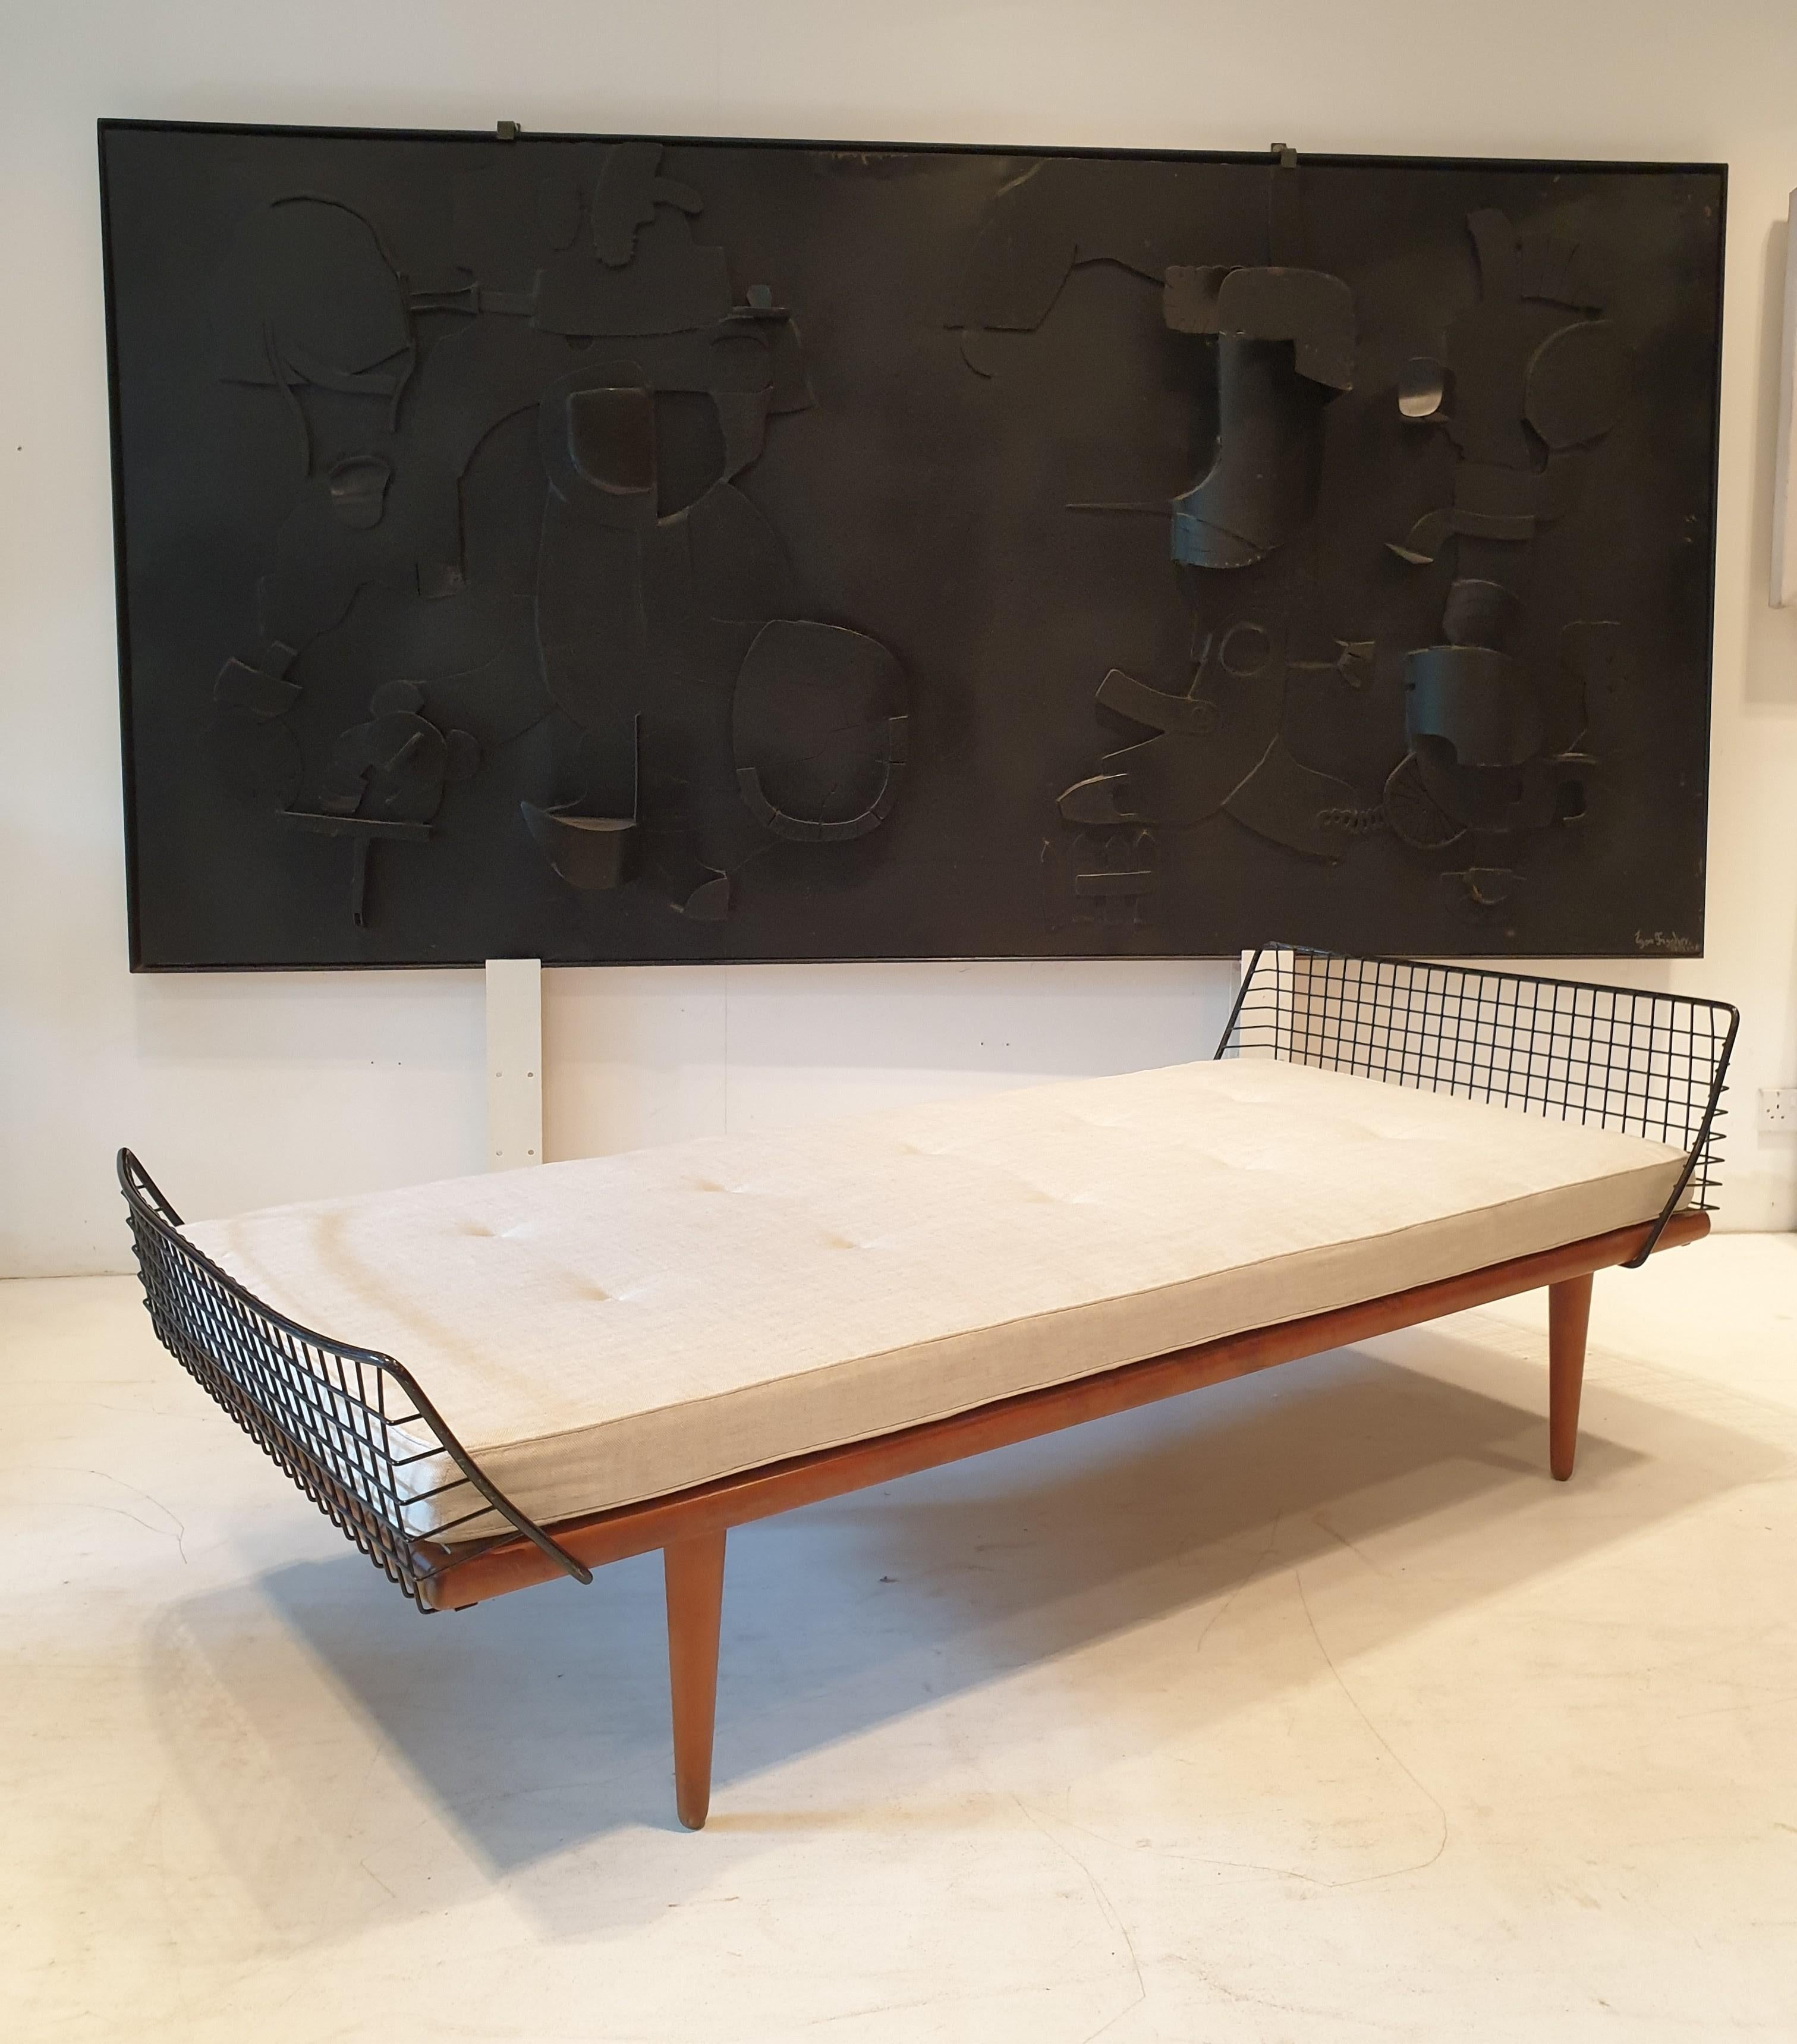 Modernist daybed with a teak frame and buttoned mattress reupholstered in linen. The mattress base sits on the original springs which are in excellent condition.This daybed is very unusual as it has the head and baseboard in metal andd feels very